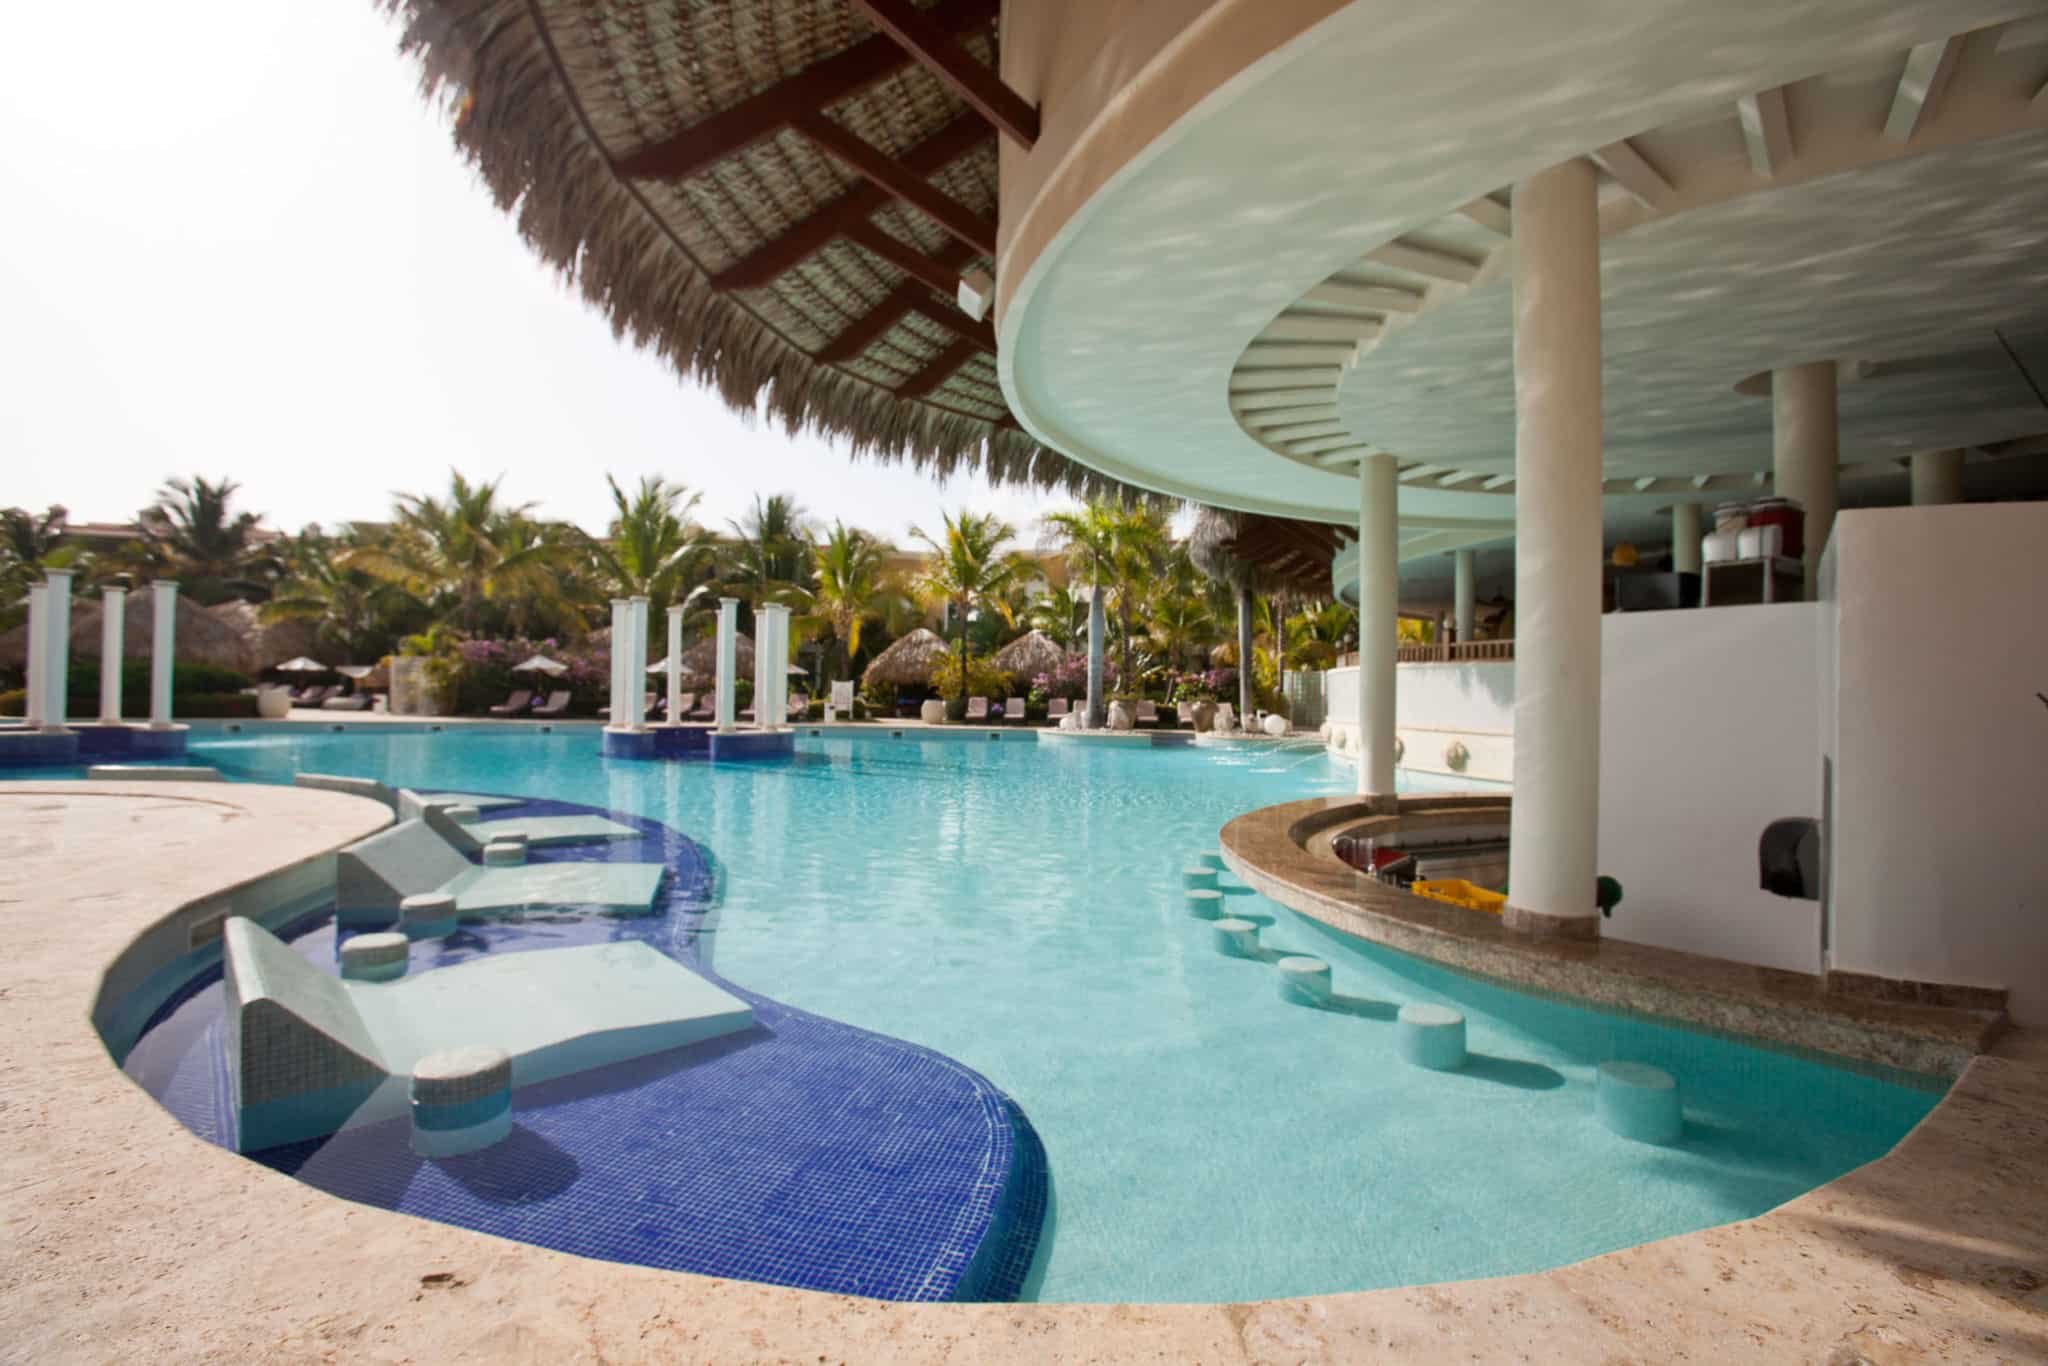 Best All-Inclusive Resorts in Punta Cana for Families